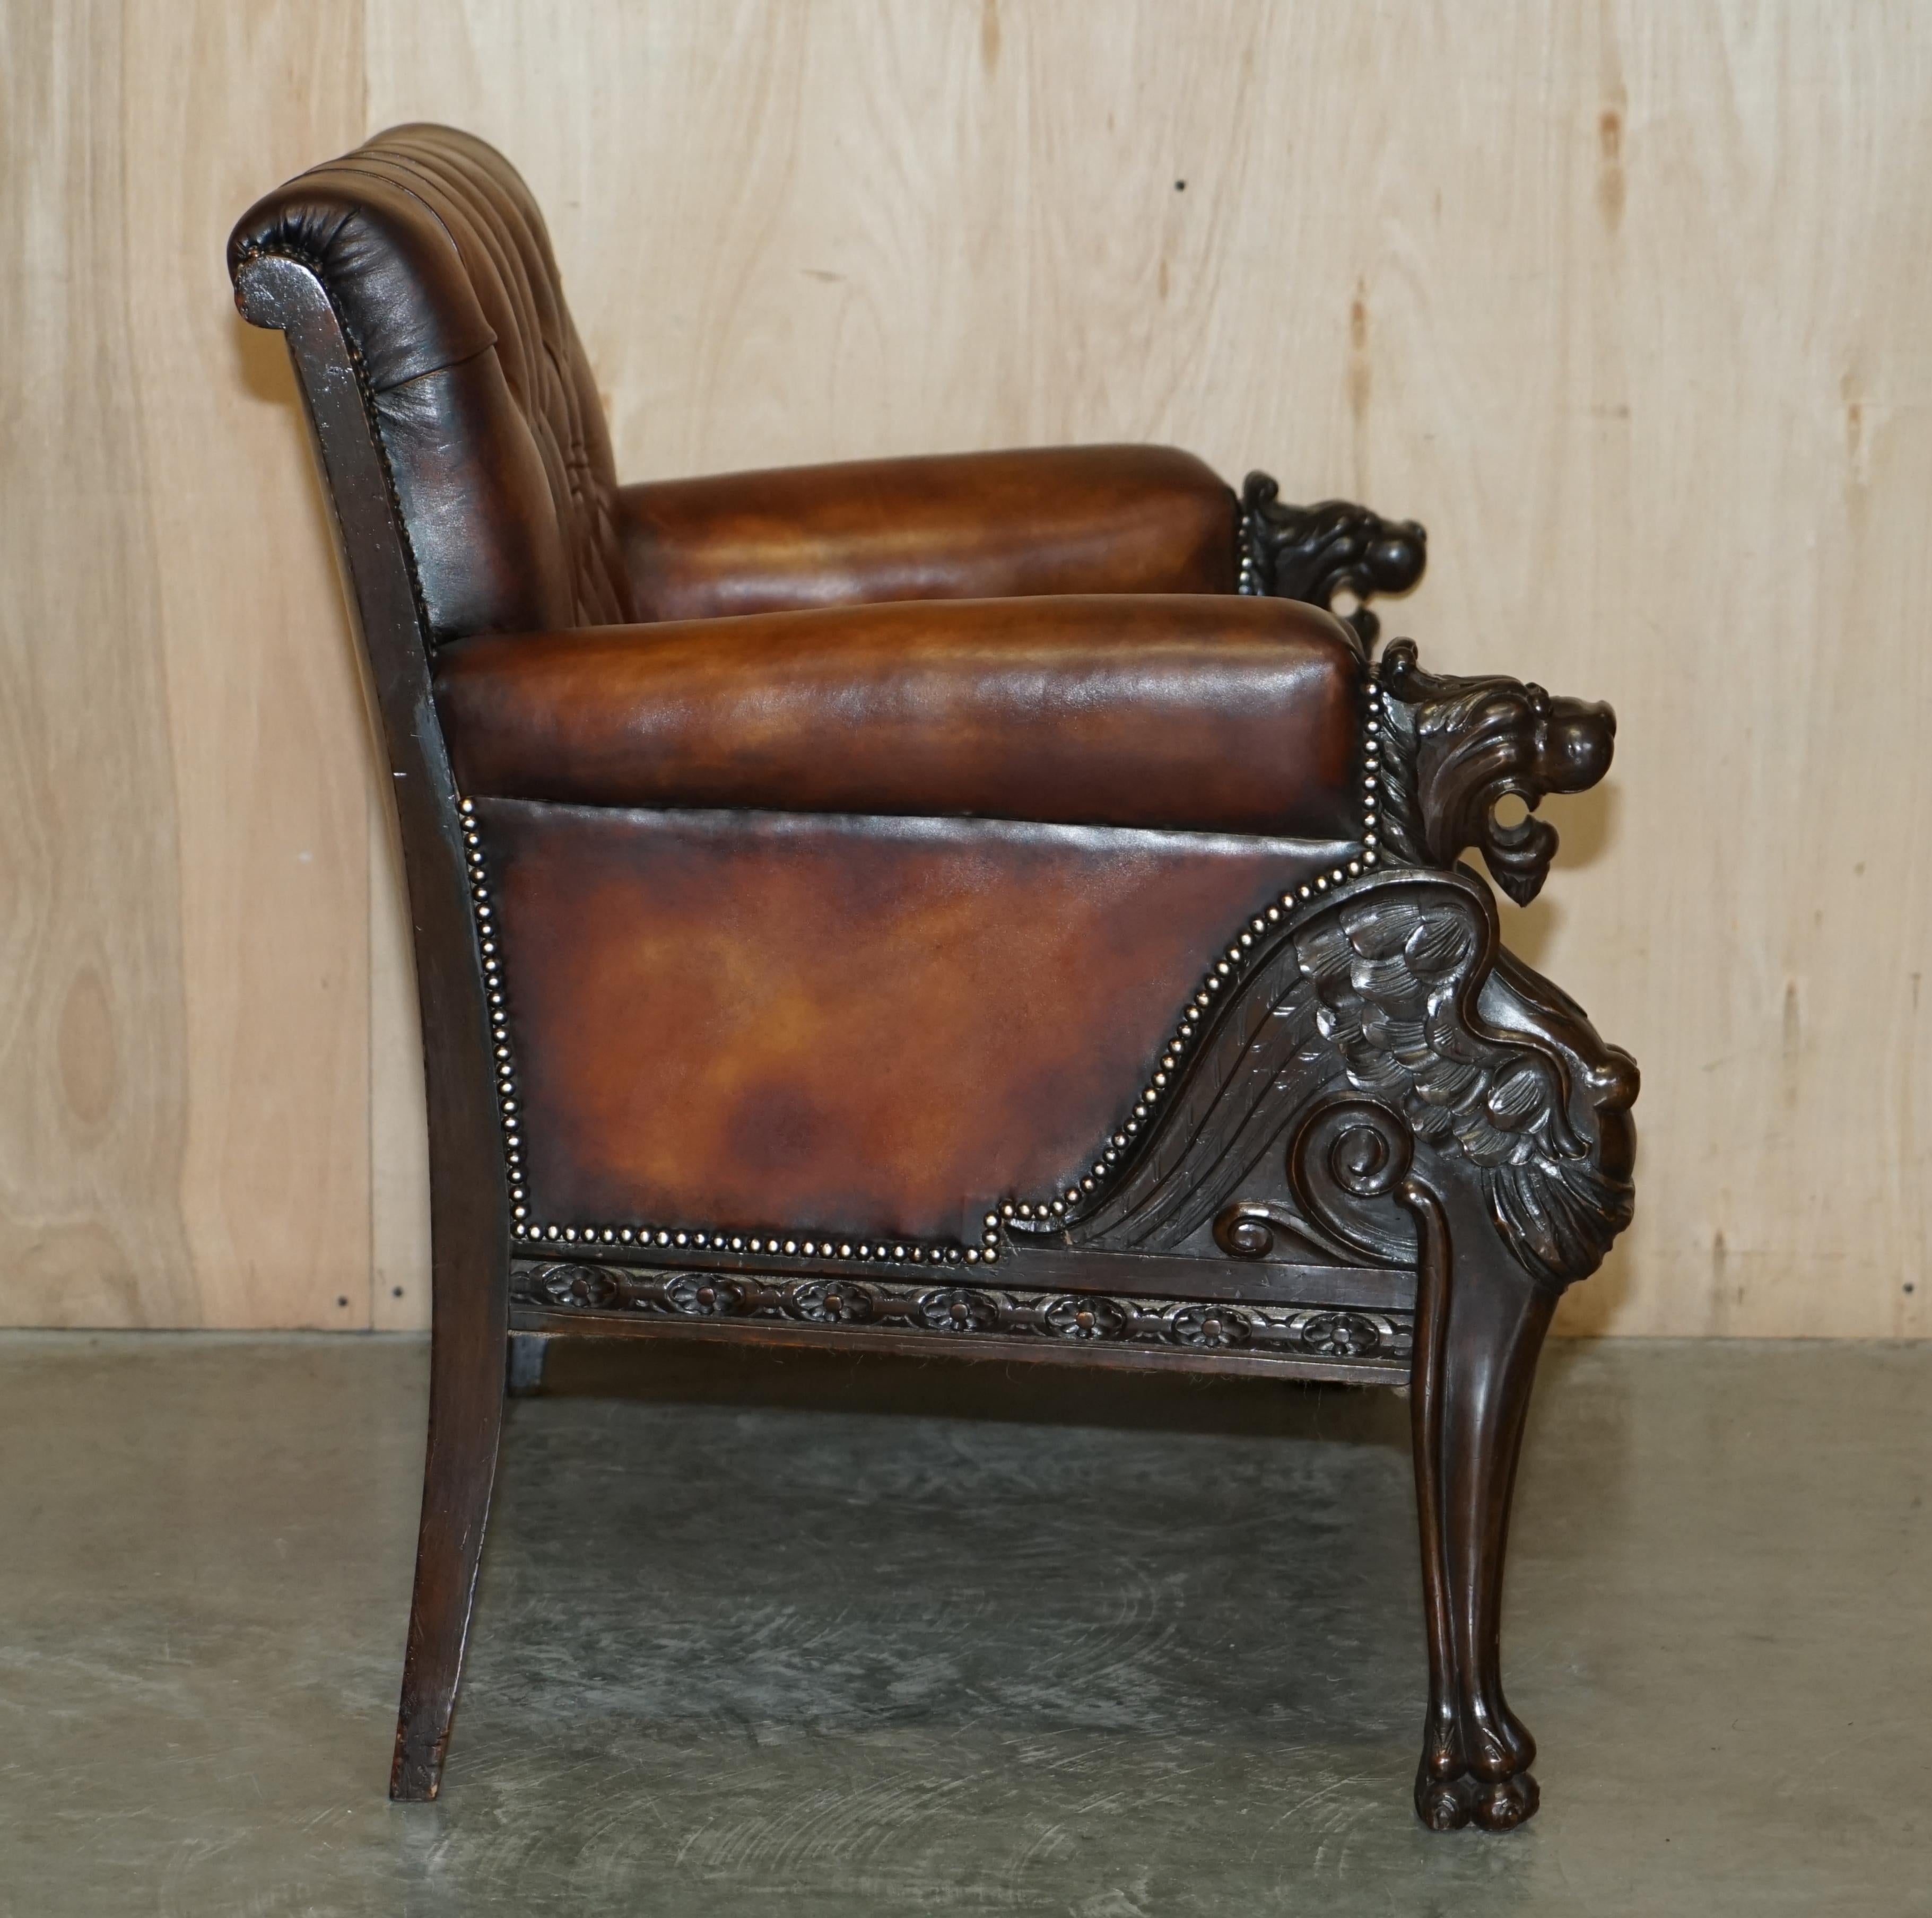 Restored Antique Lion Hand Carved Brown Leather Chesterfield Sofa Armchair Suite For Sale 5